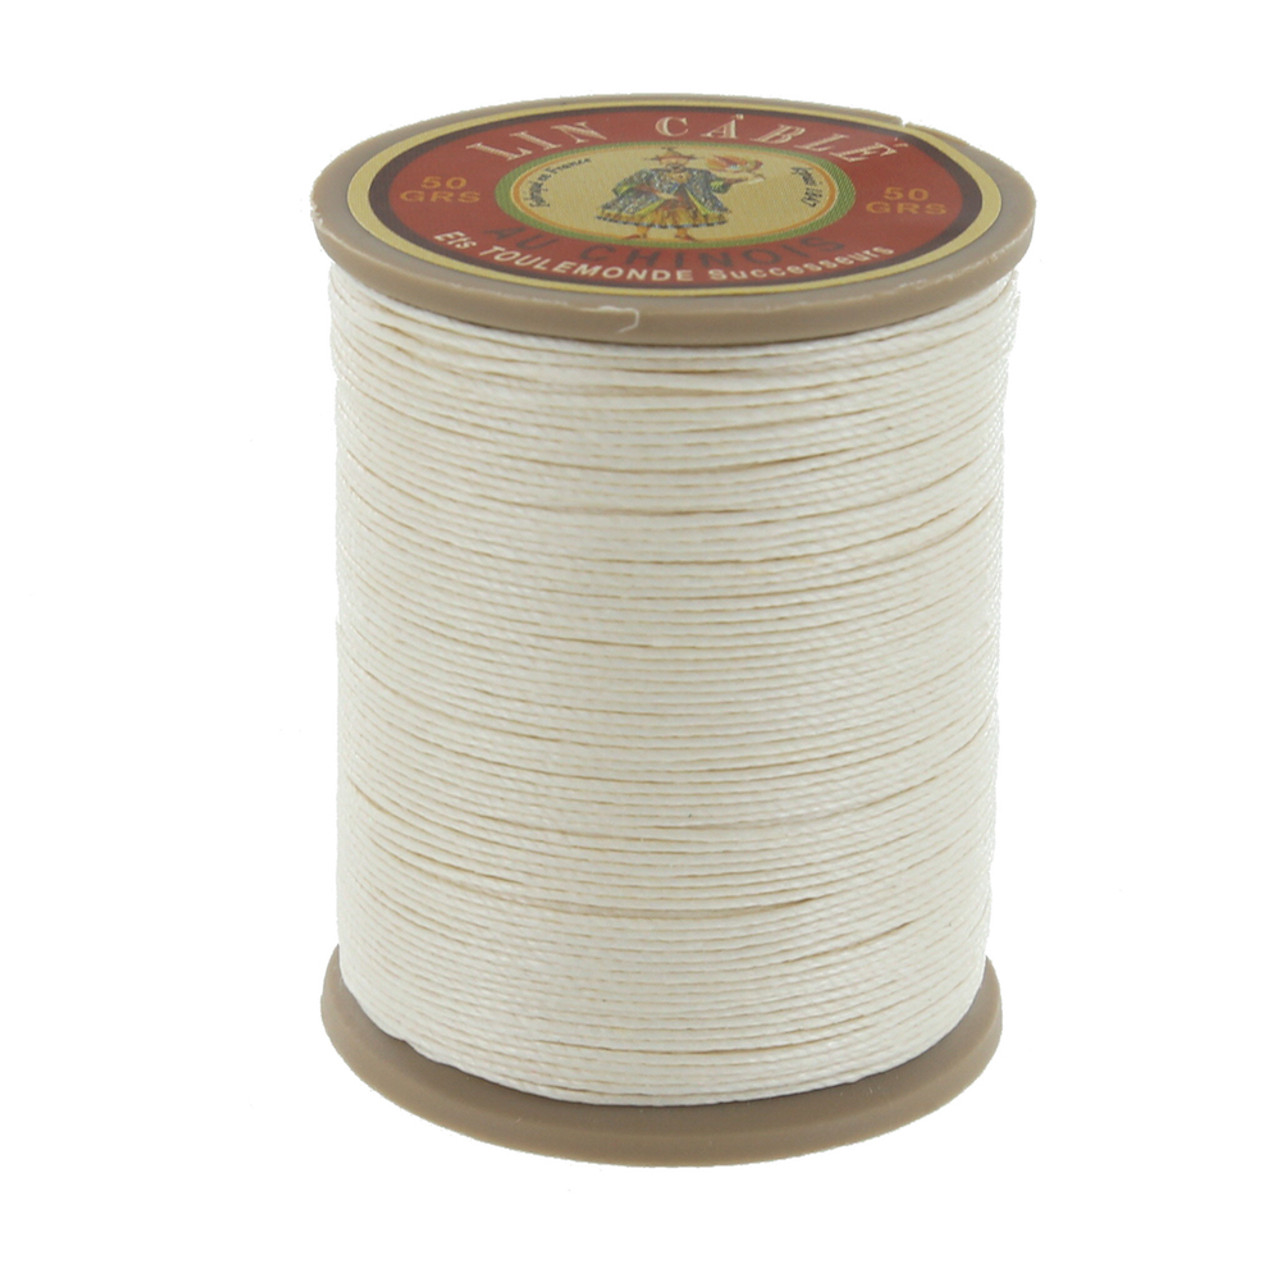 Fil Au Chinois Lin Cable, Waxed Linen Thread, Natural (105